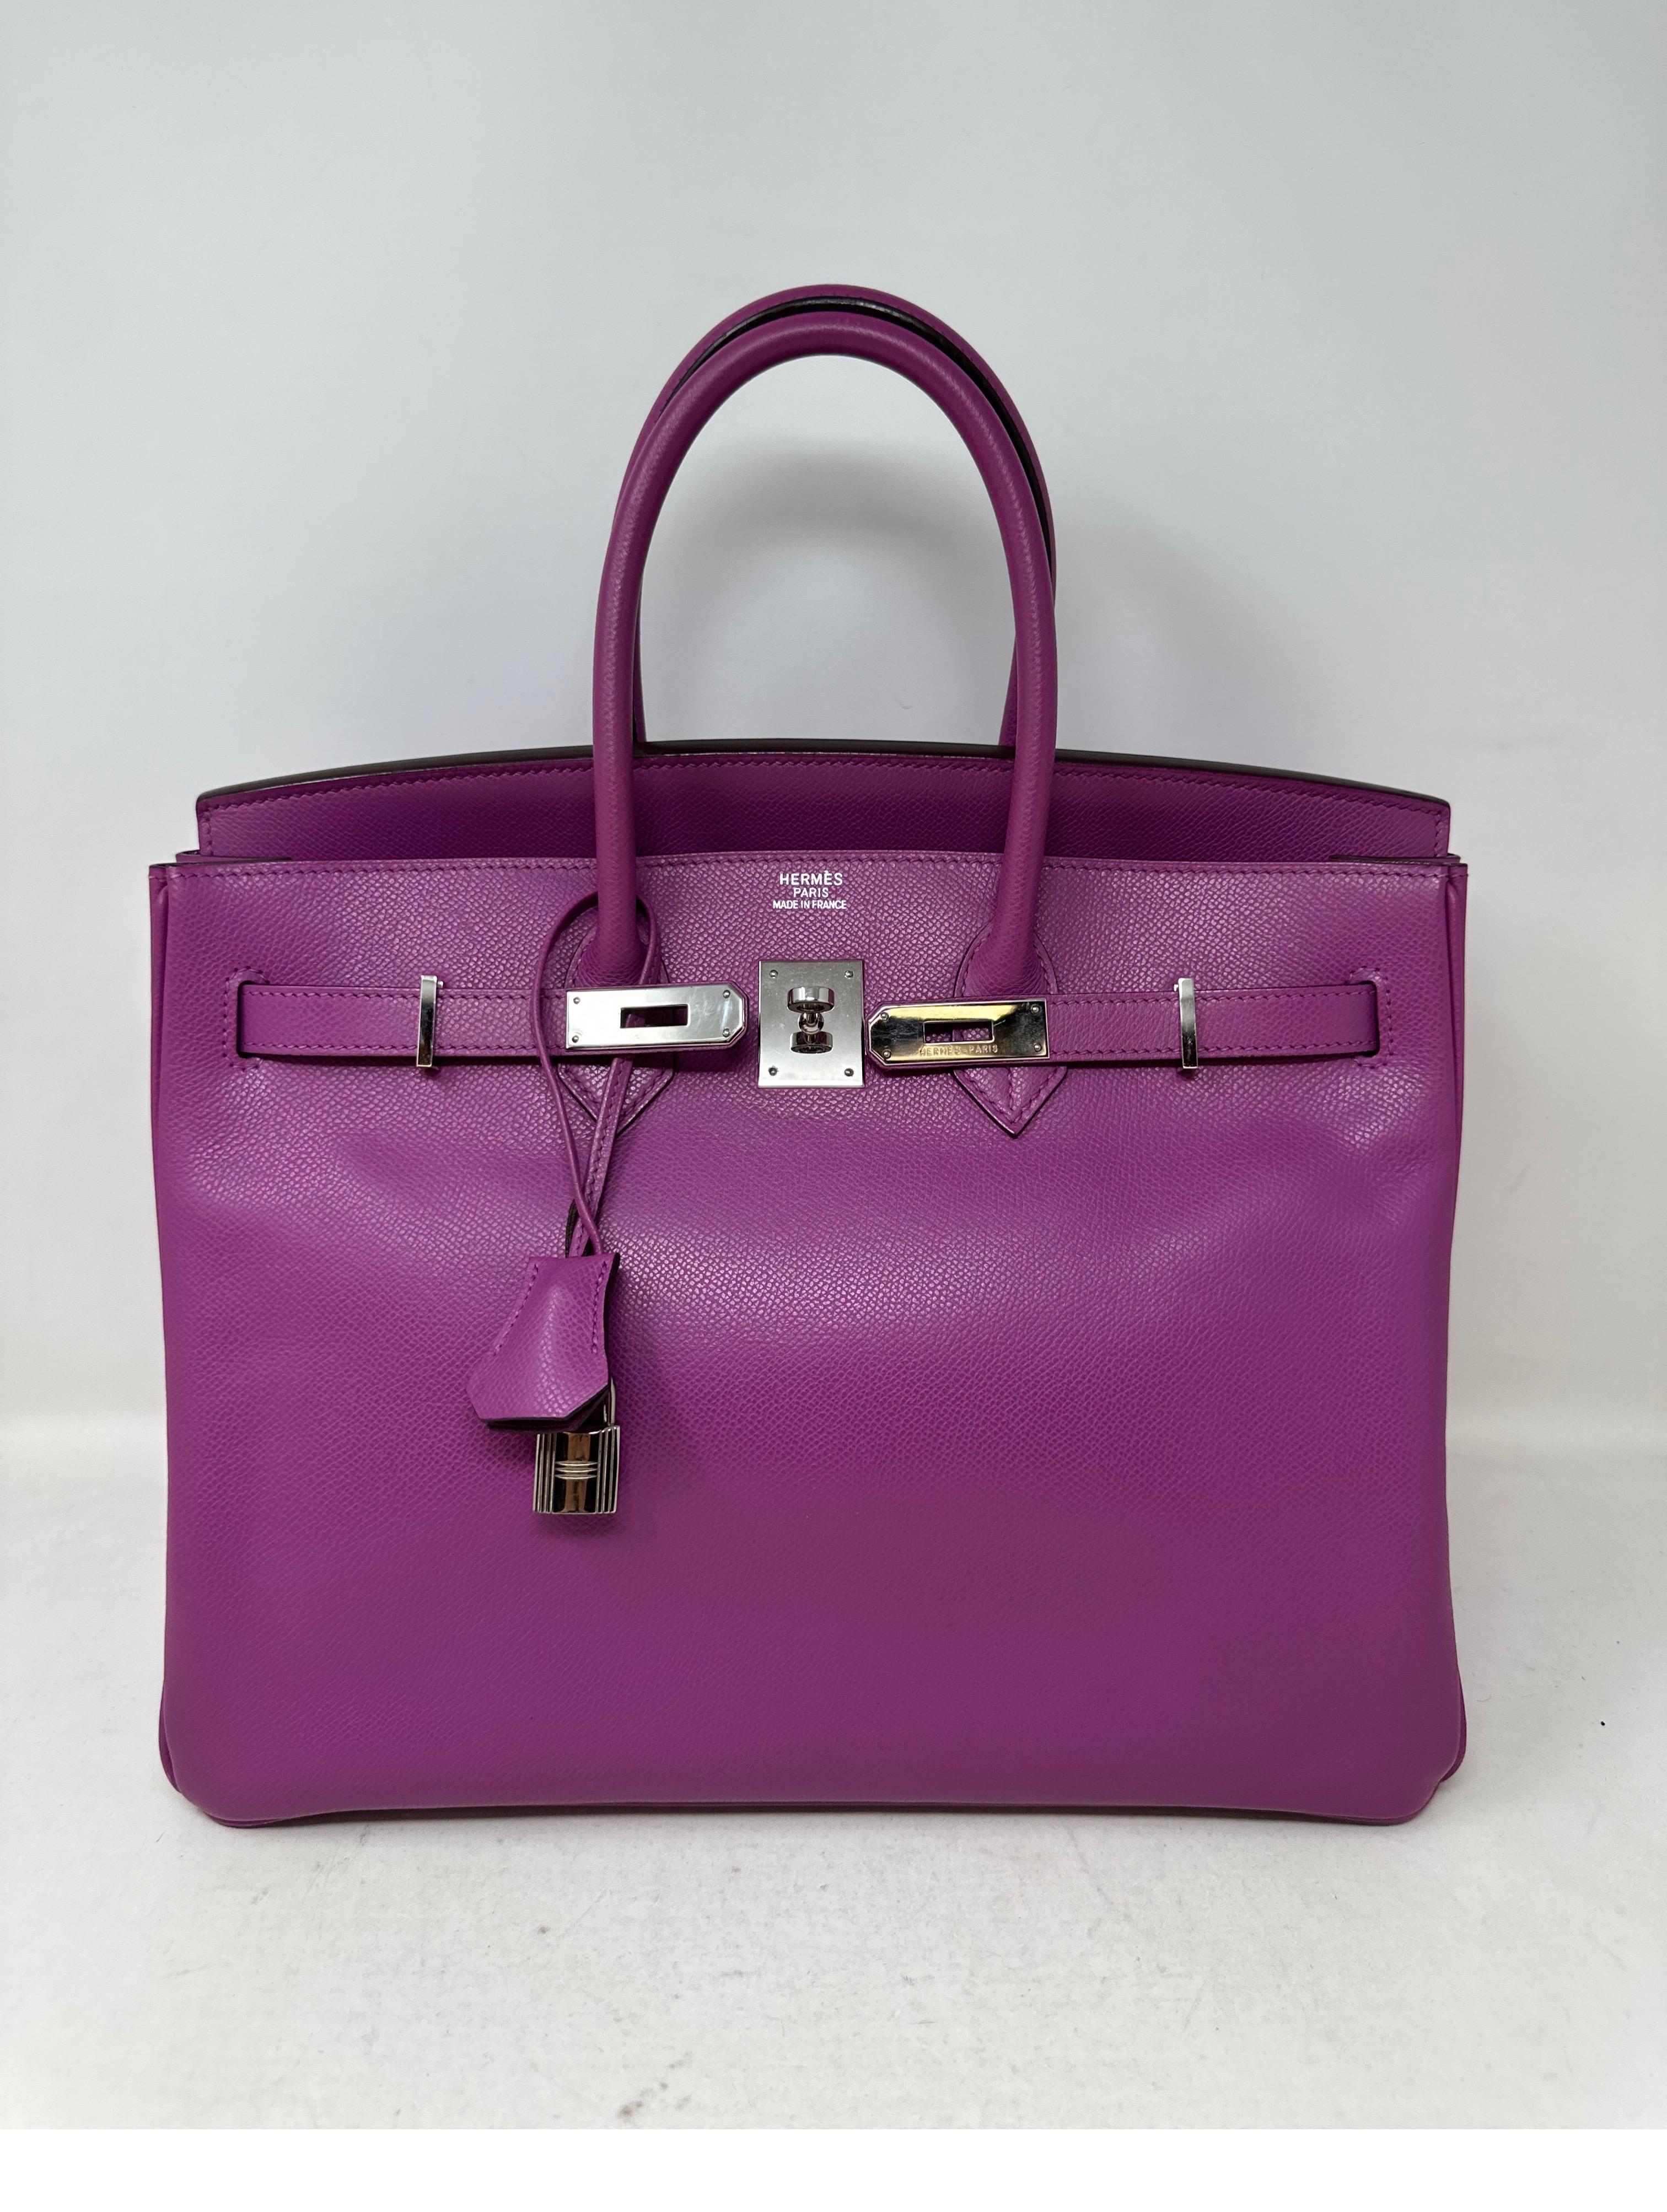 Hermes Cyclamen Birkin 35 Bag. Light purple leather Birkin bag. Palladium silver hardware. Excellent condition. Interior clean. Unique color. Hard to find. Gift worthy bag. Includes clochette, lock, keys, and dust bag. Guaranteed authentic. 